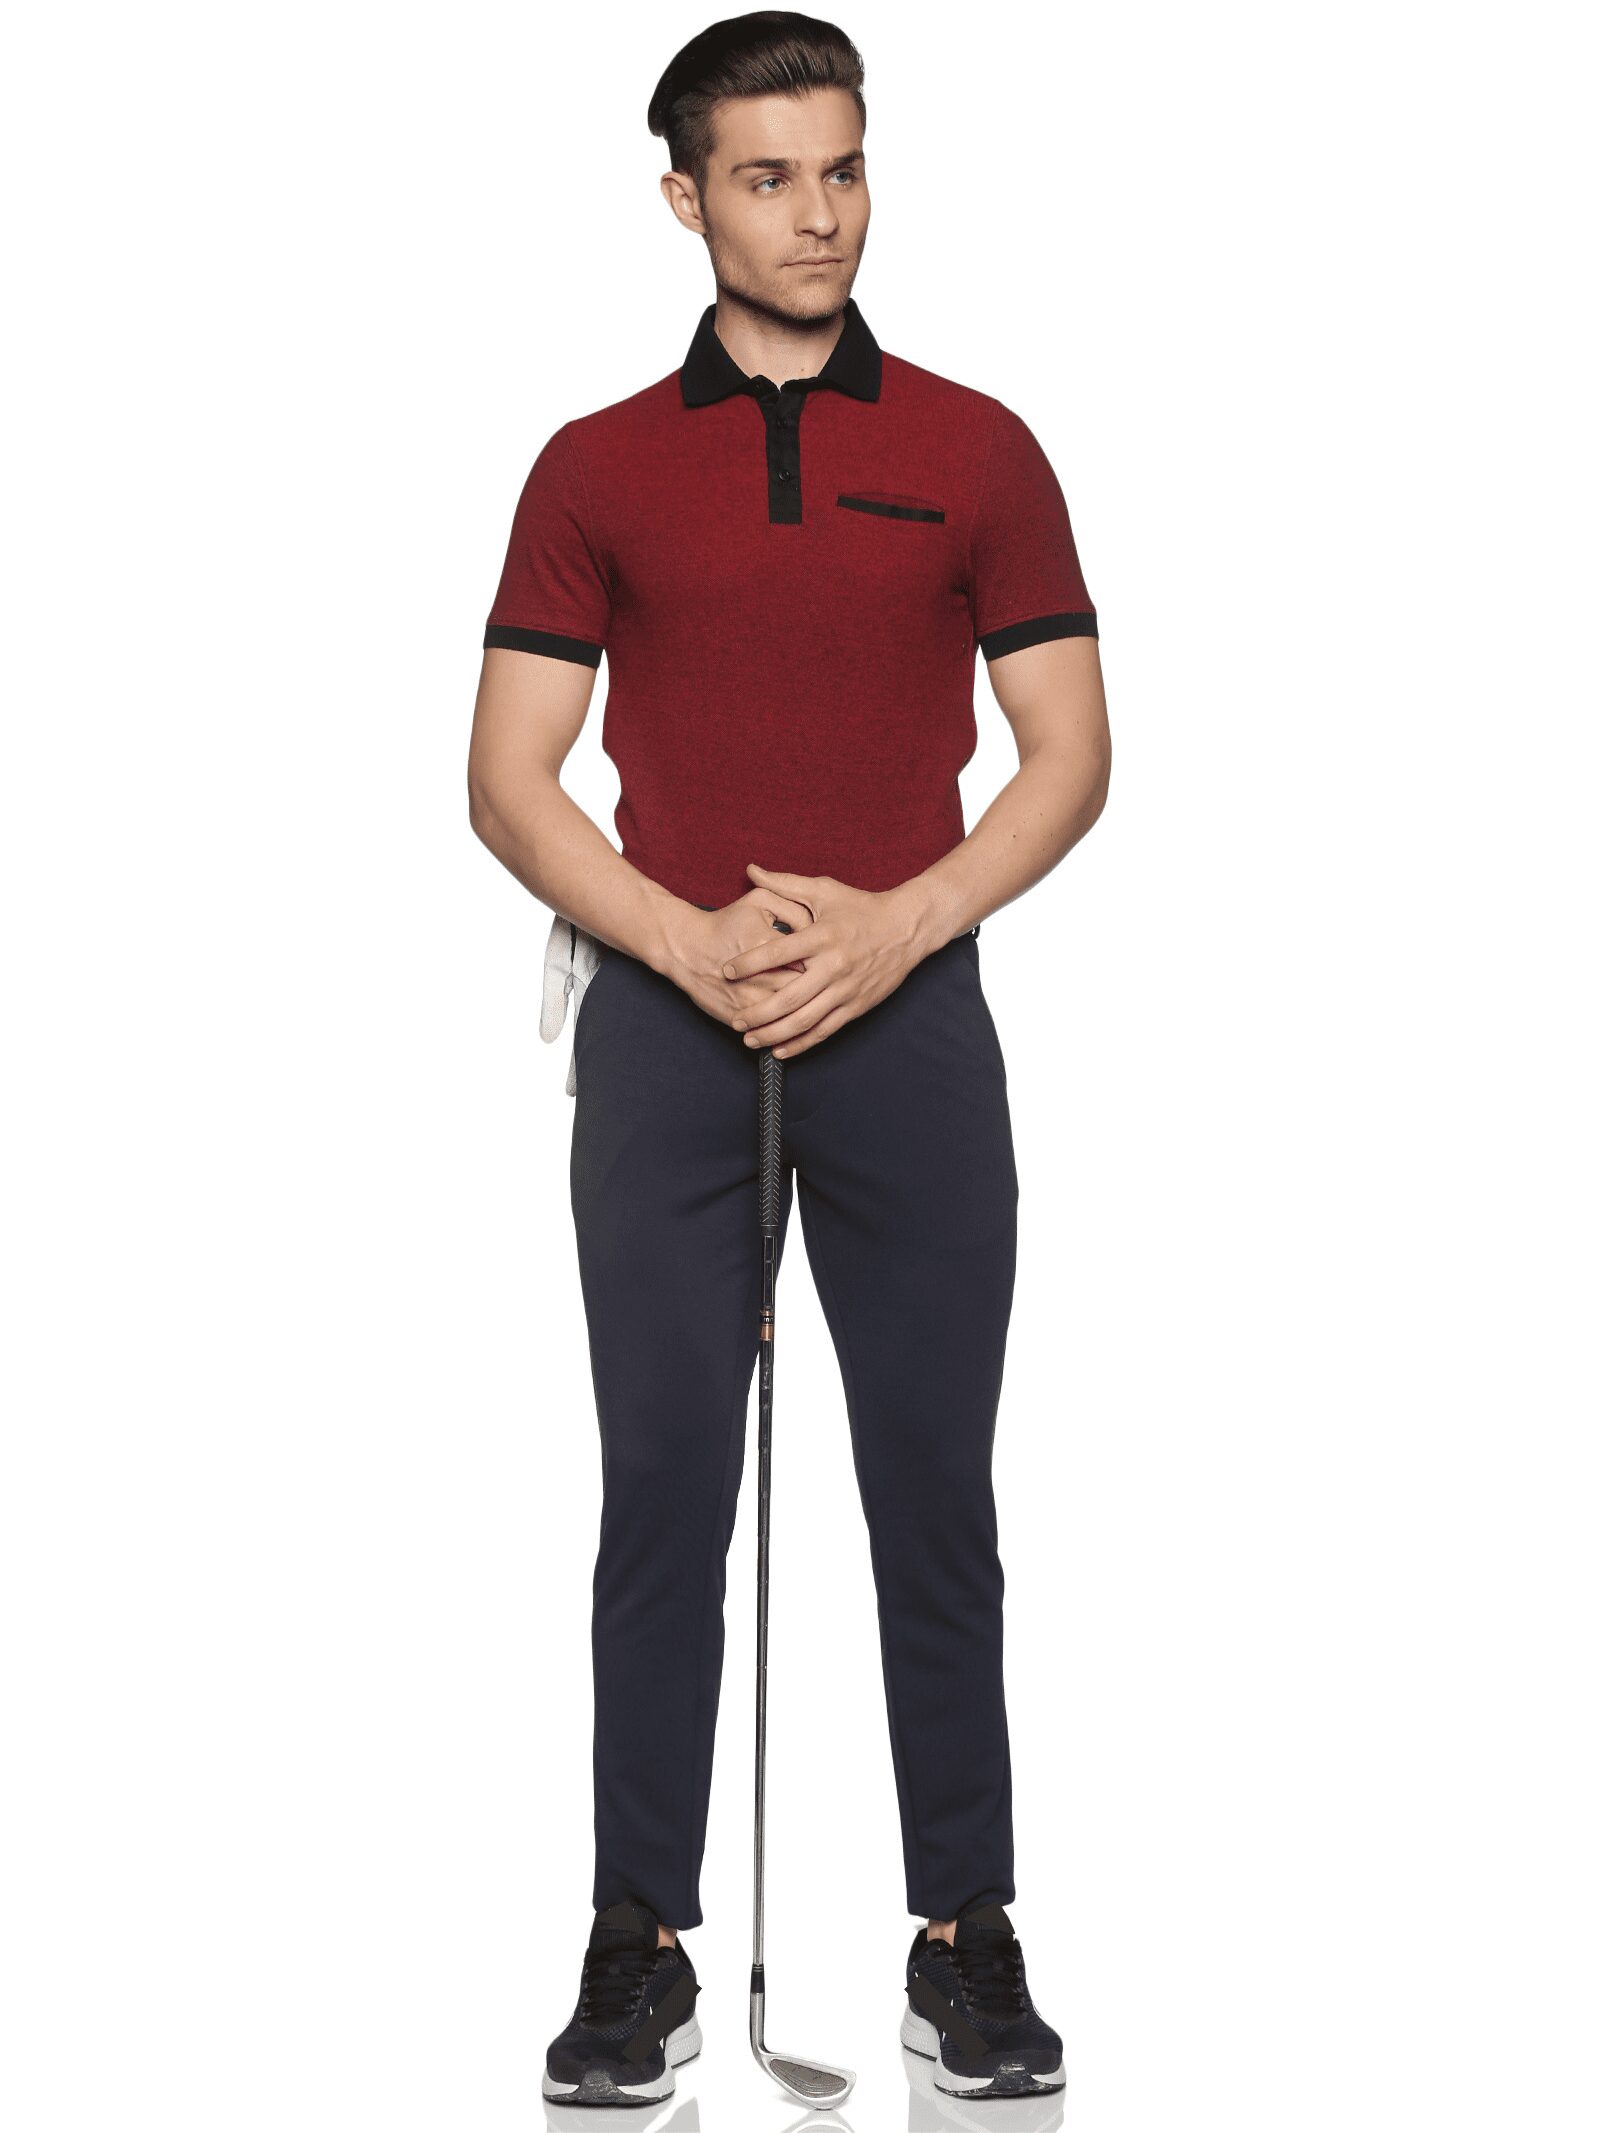 Red Nike Golf Dri Fit Modern Tech Pants Mens Golf Trousers  RED ALL SIZES   RRP65  Golf Trousers and Clothing